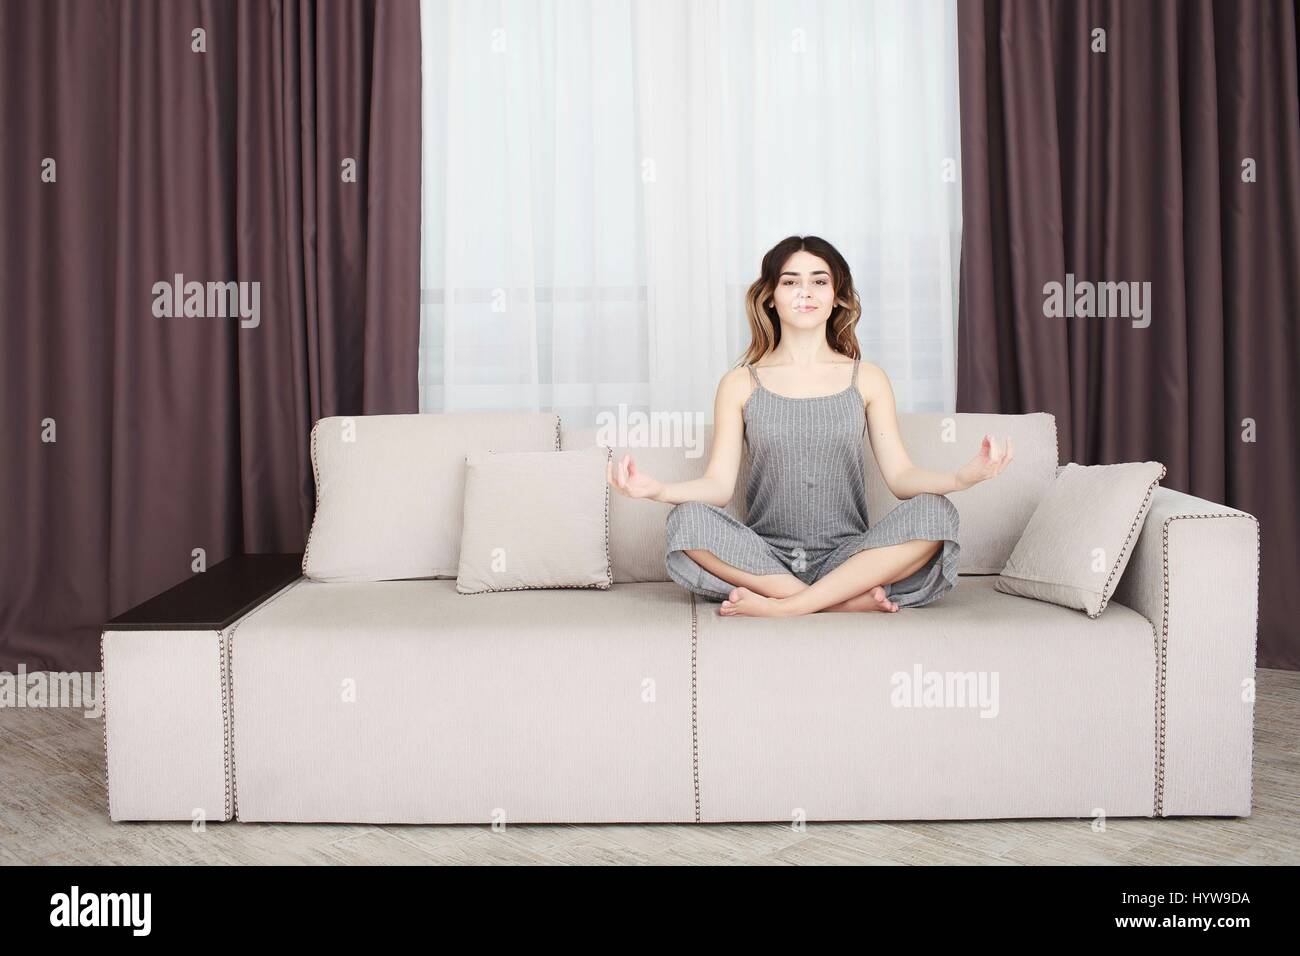 Young woman sitting on a sofa in the lotus position meditating Stock Photo